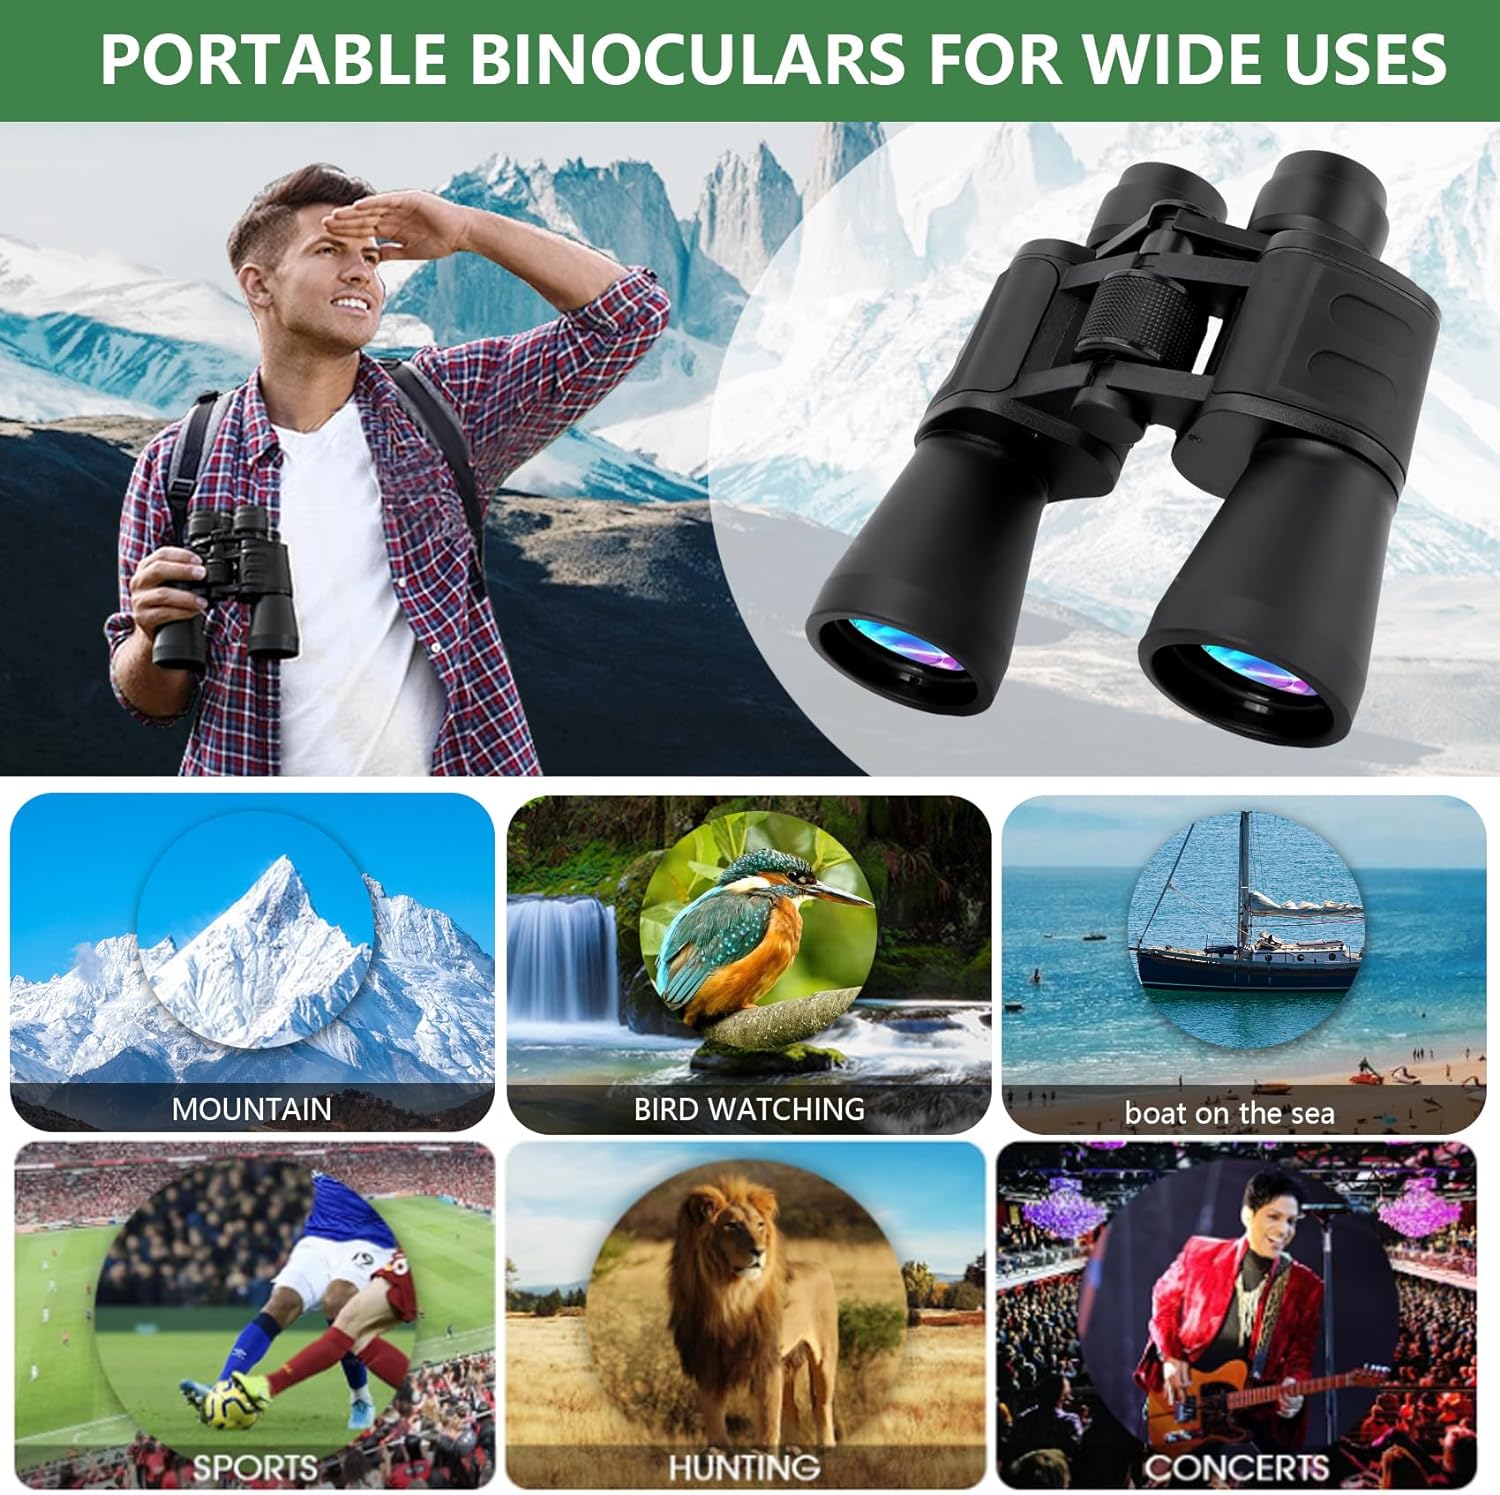 Binoculars 20x50 - Professional High Magnification HD Compact Binoculars for Bird Watching, Hunting, and Outdoor Activities - Low Light Night Vision, BAK-4 Prism - Portable, Durable, Easy (Black)